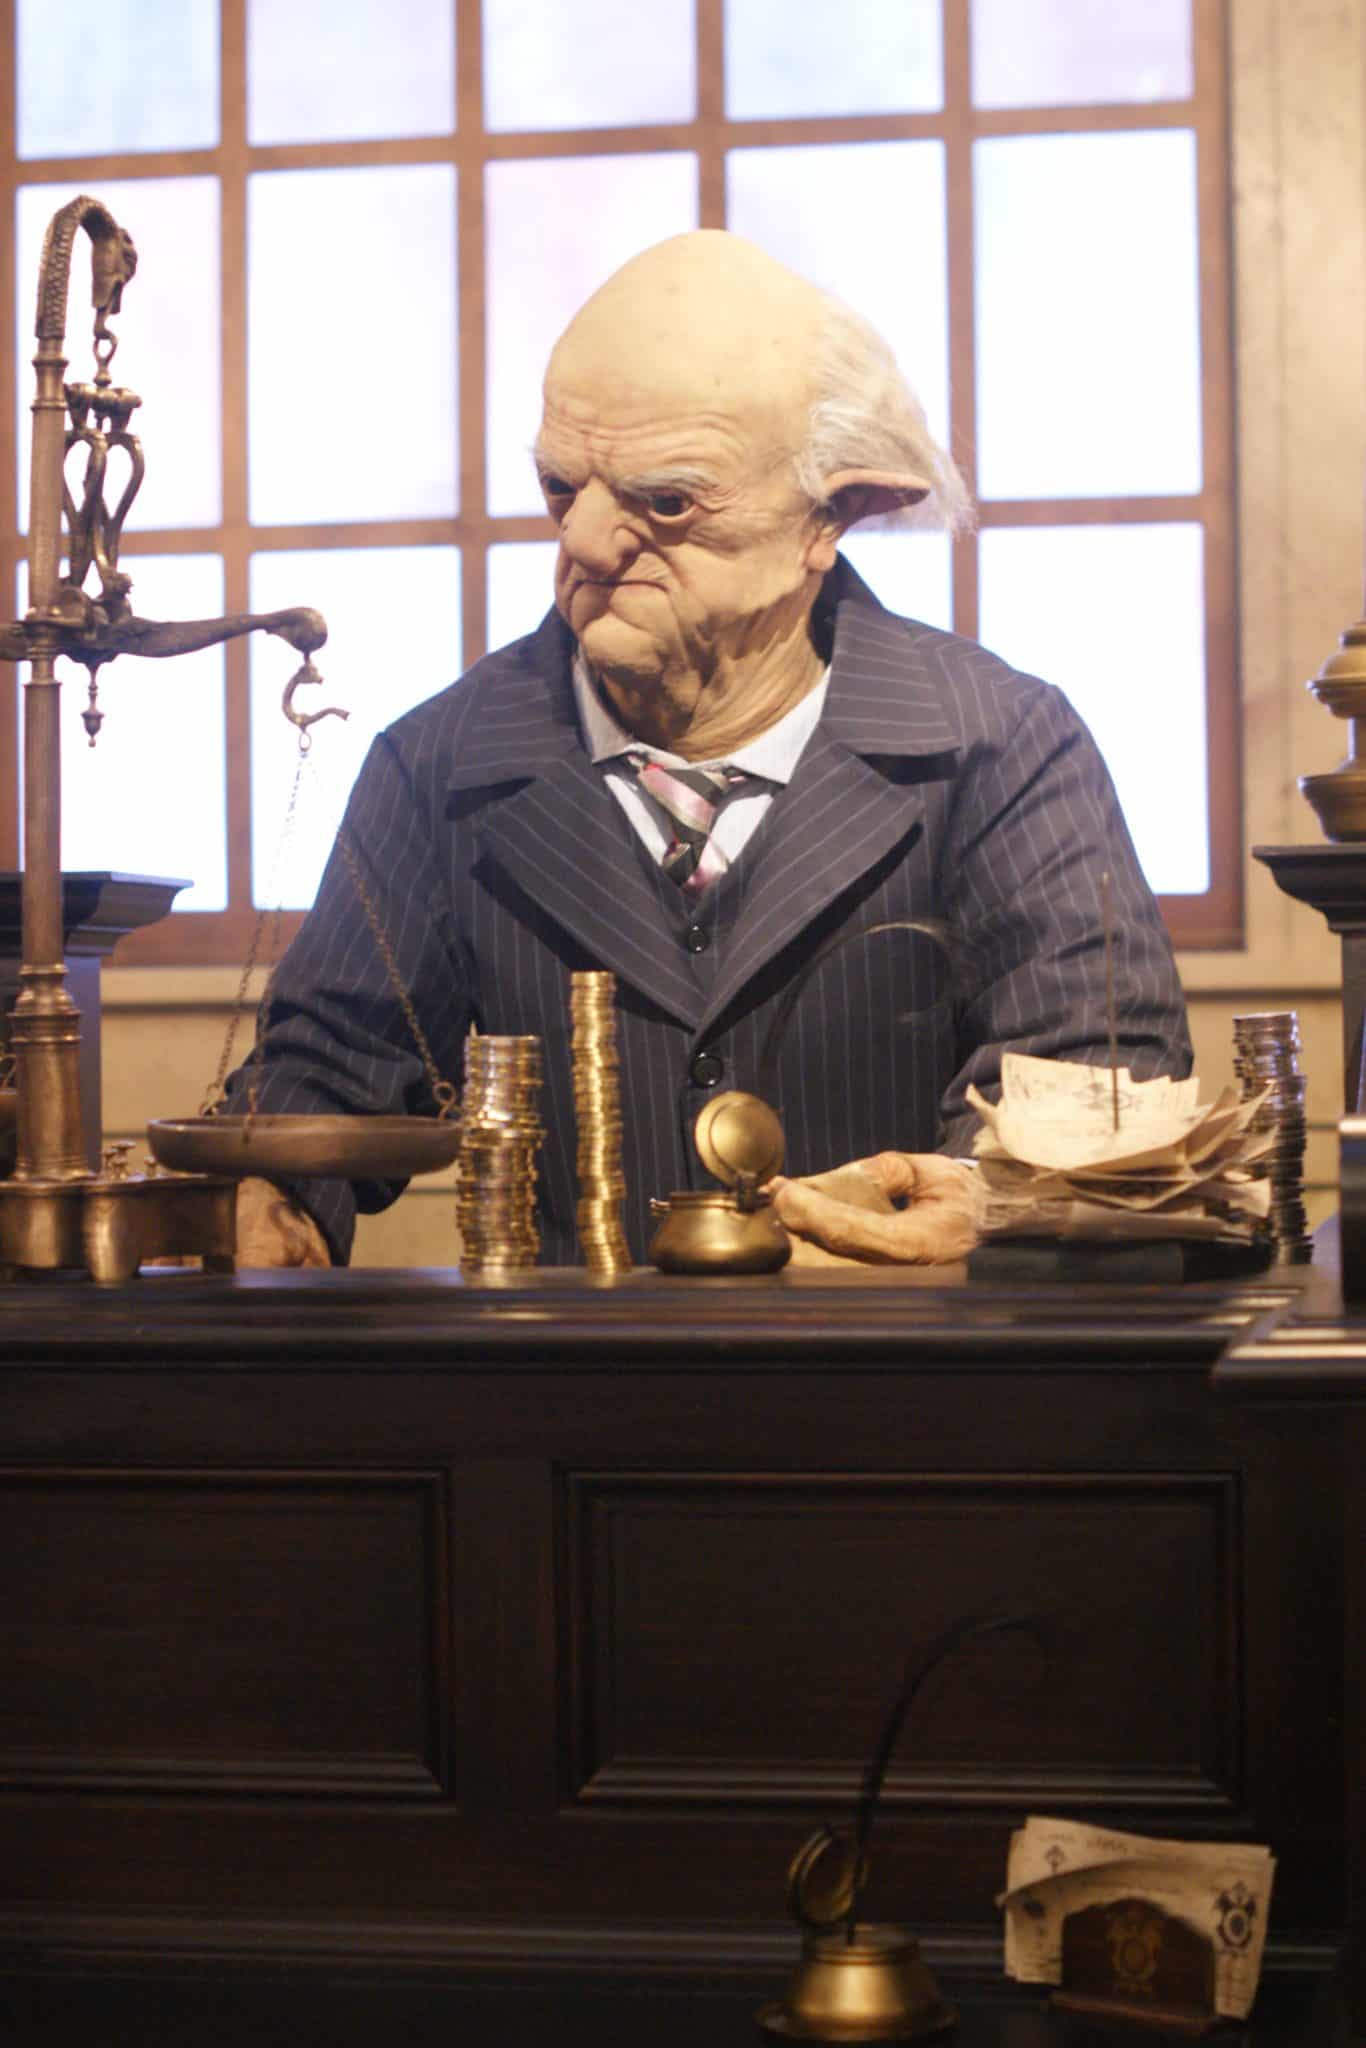 Diagon Alley Goblin in Gringotts Bank -10 Things I didn't know about Universal Studios Orlando - Tips for visiting Universal Studios Orlando and enjoying Diagon Alley - #UniversalStudios #DiagonAlley #Travel #Florida #orlando #Universal